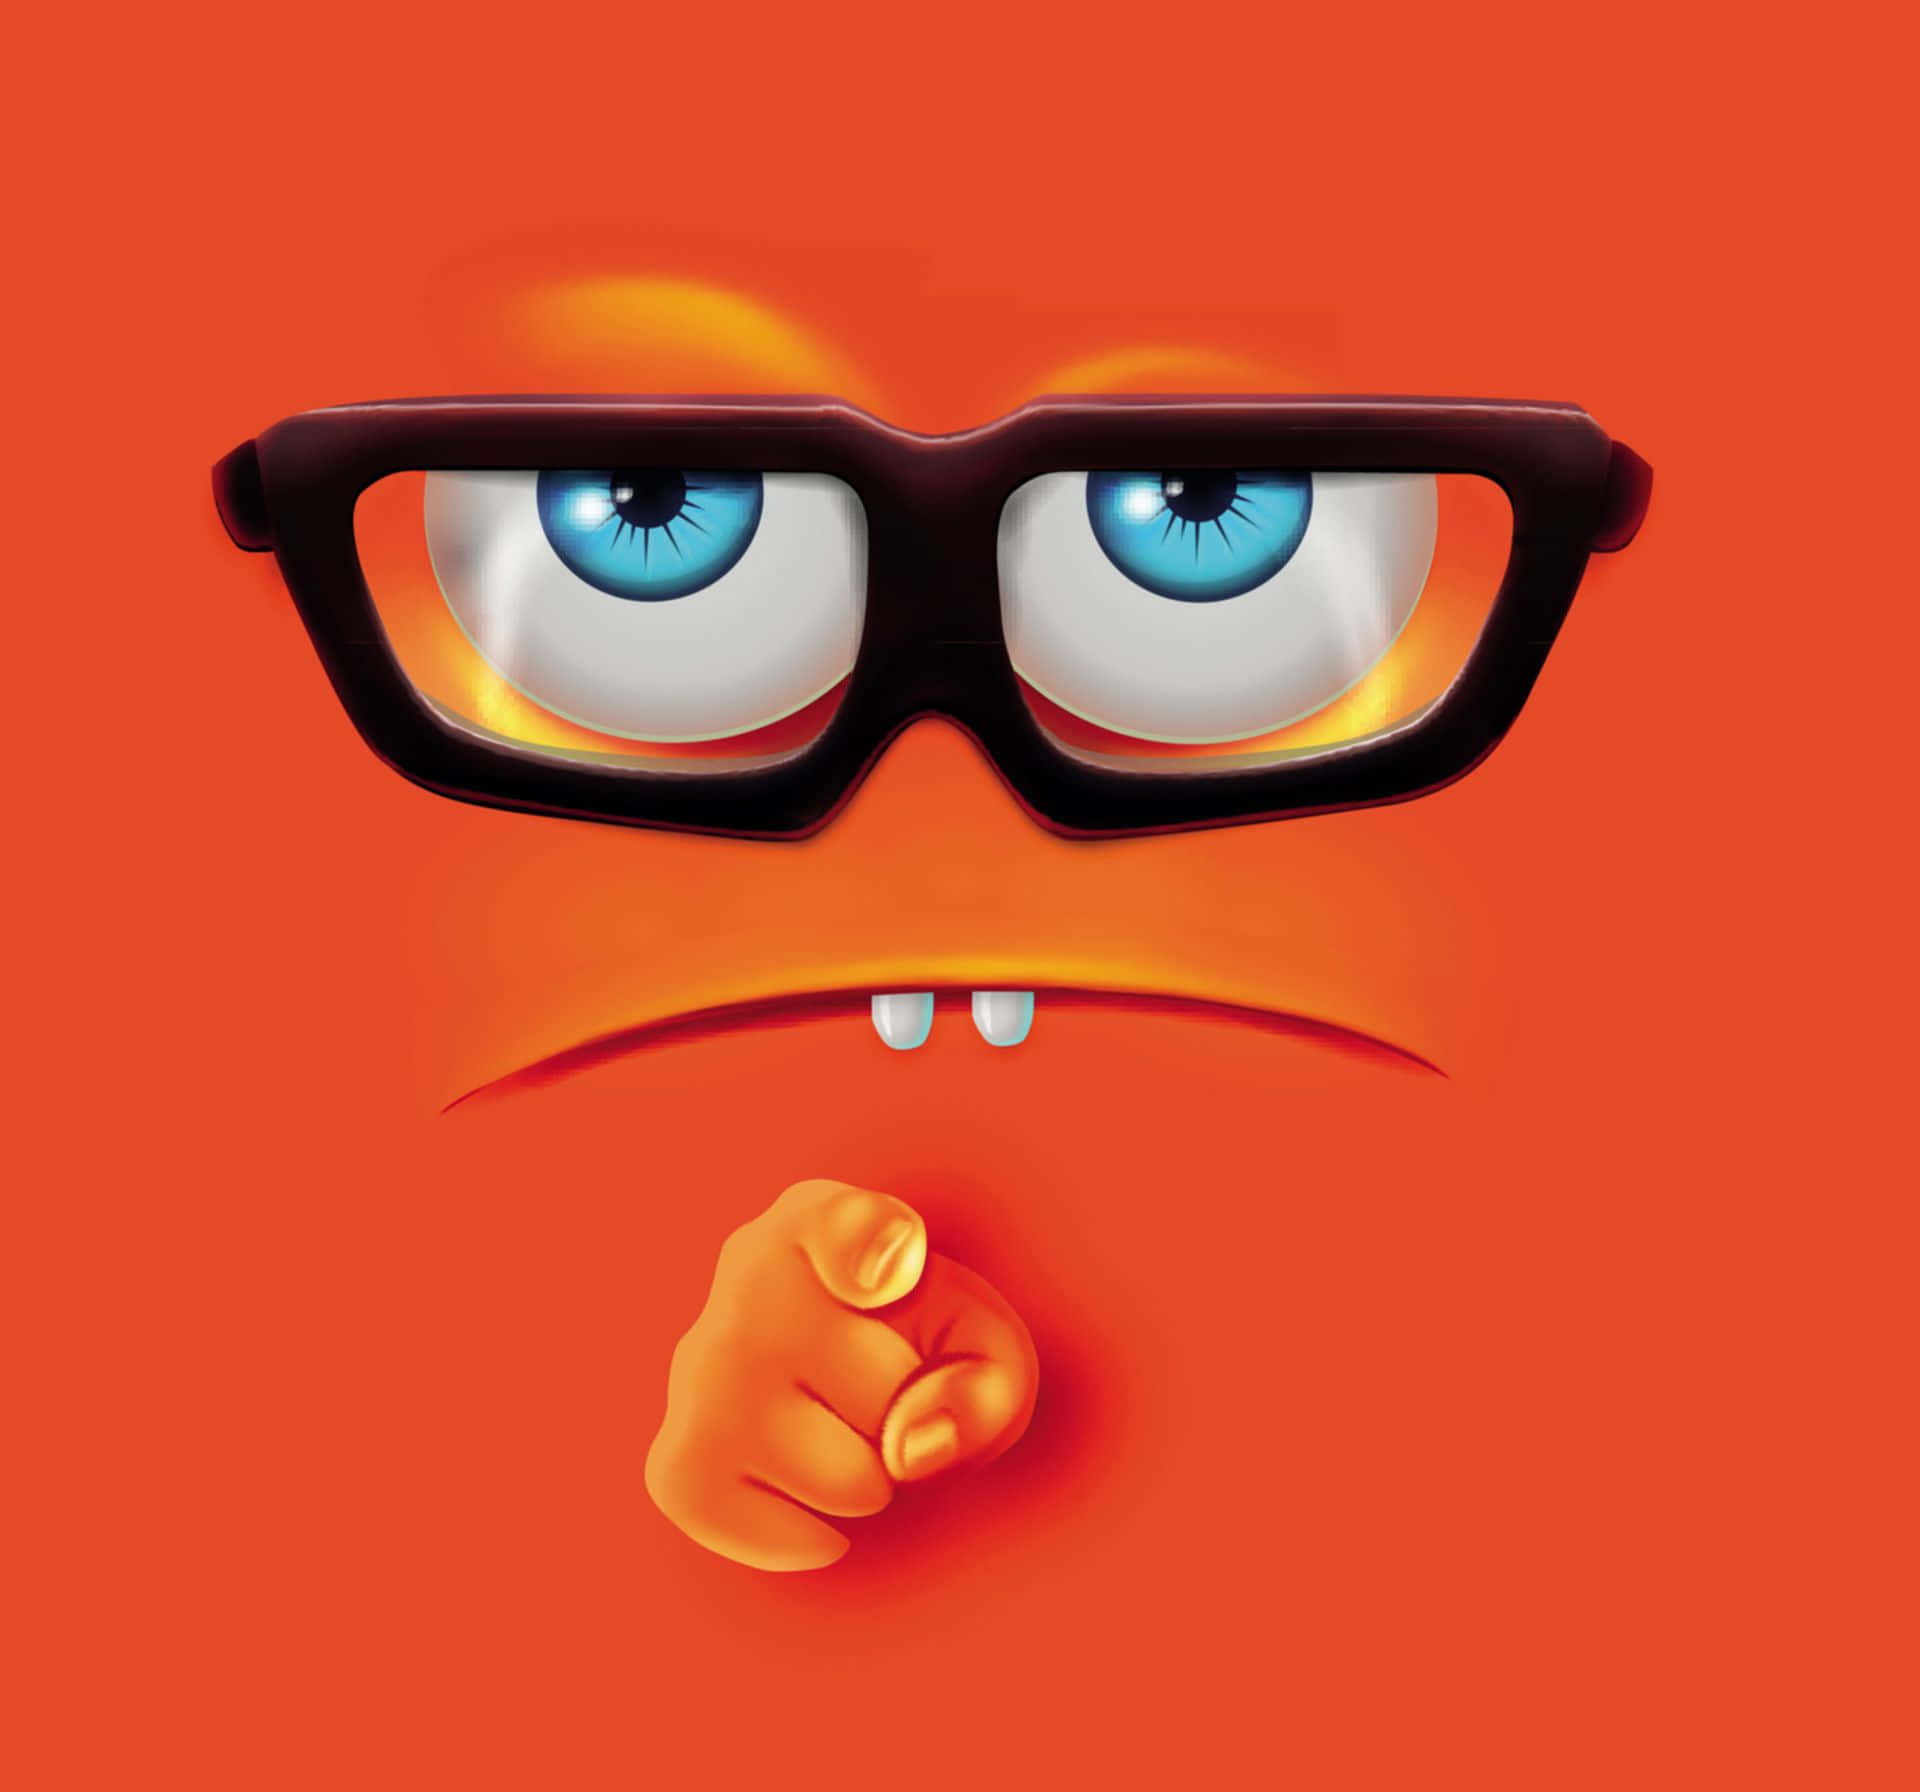 An Orange Monster With Glasses And A Finger